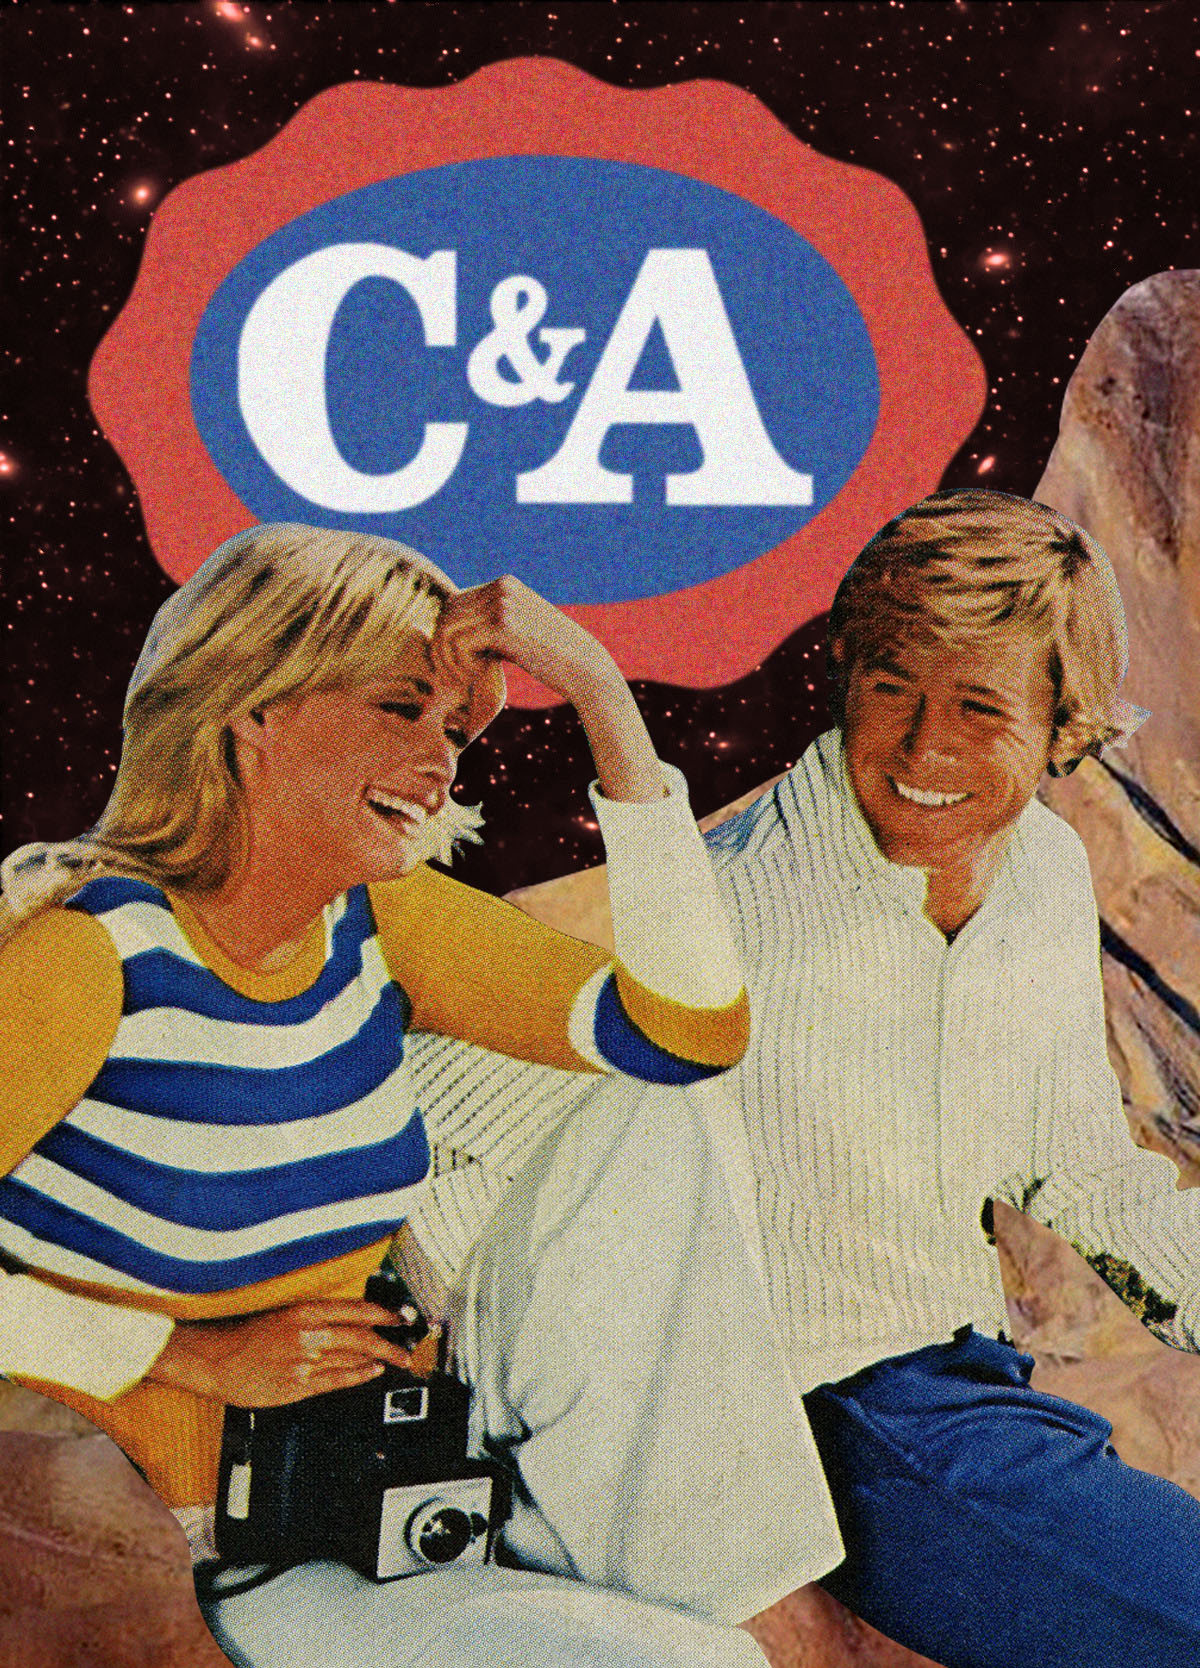 Remember C&A, Tammy Girl and Dolcis? 18 Clothes and Shoe Shops of